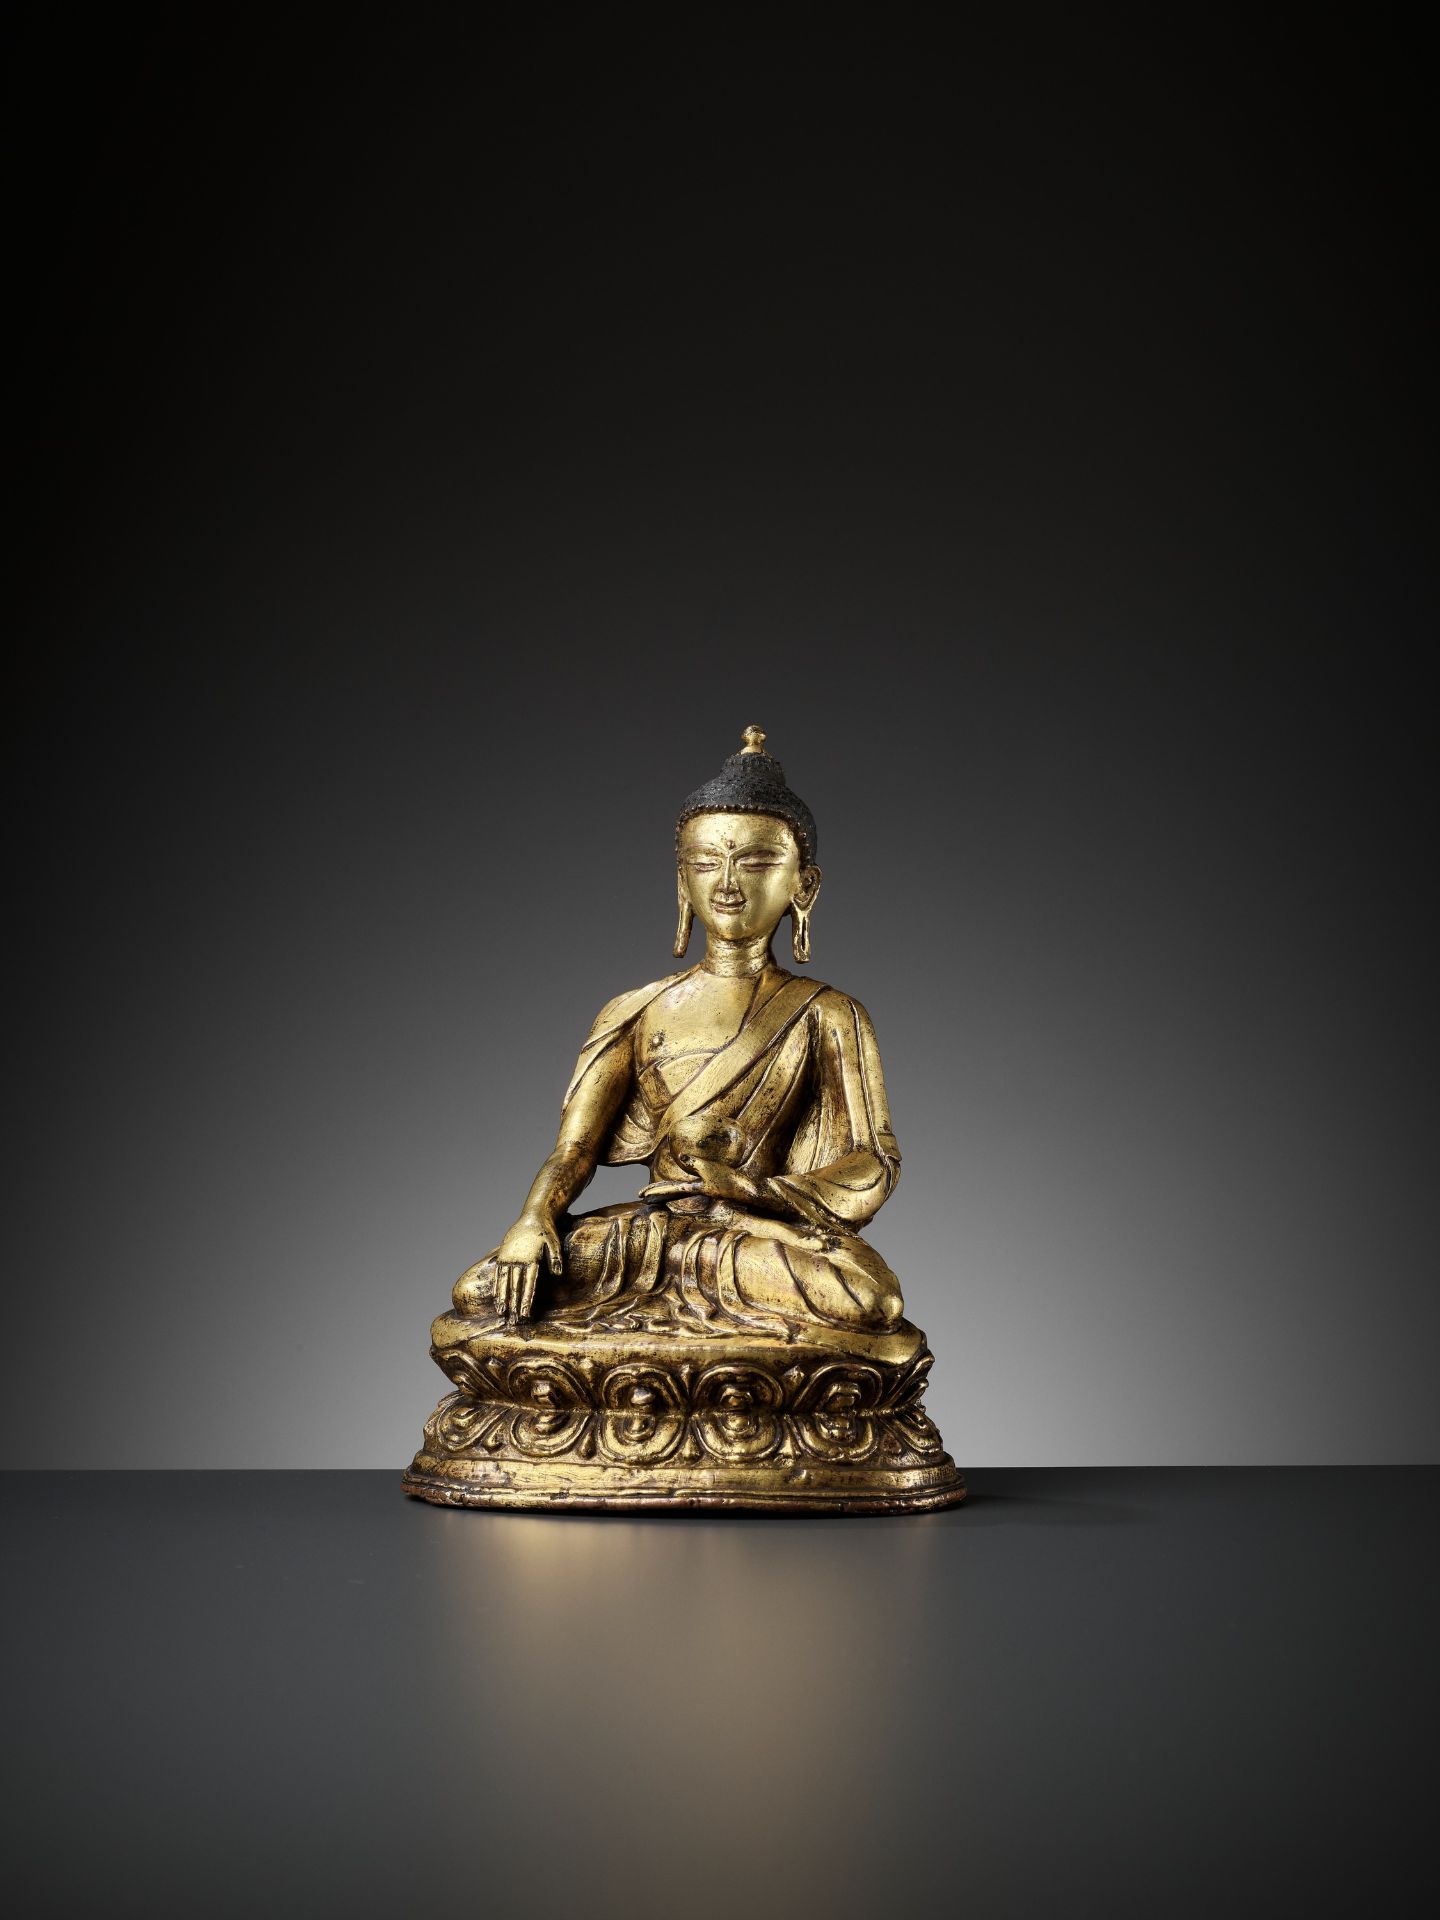 A GILT COPPER ALLOY FIGURE OF BUDDHA, 11TH-12TH CENTURY - Image 6 of 17